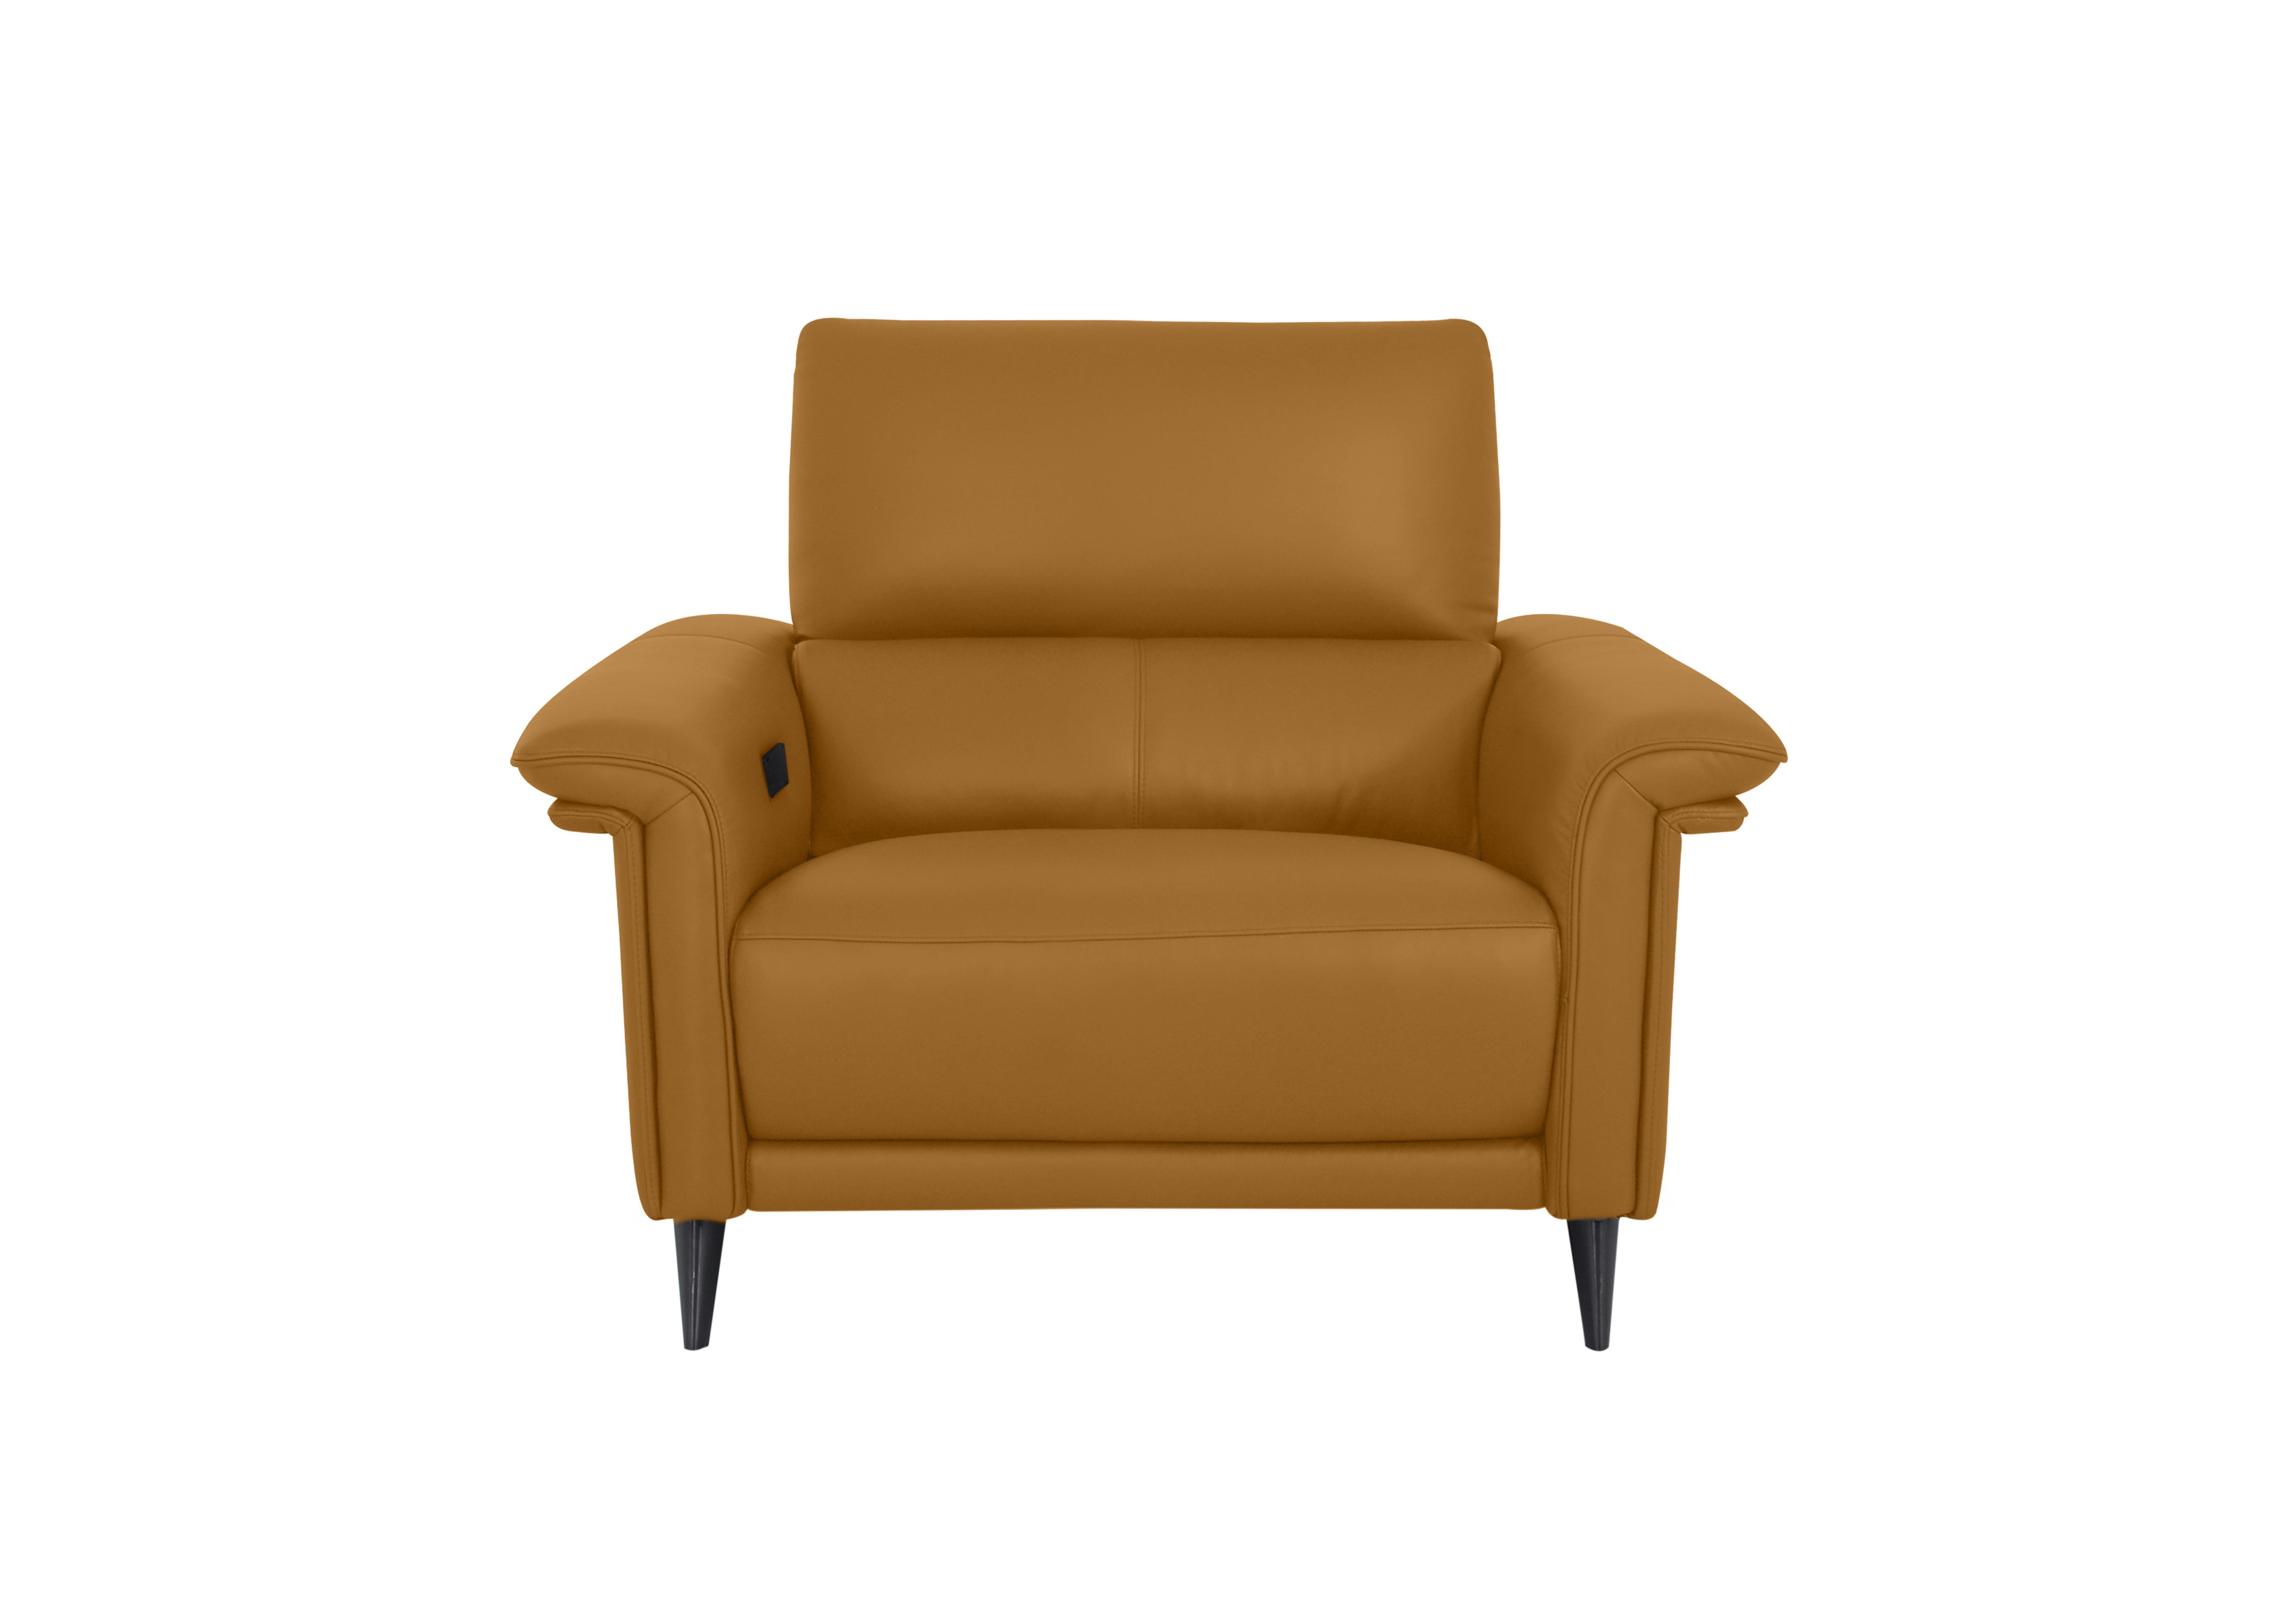 Huxley Leather Chair in Np-606e Honey Yellow on Furniture Village